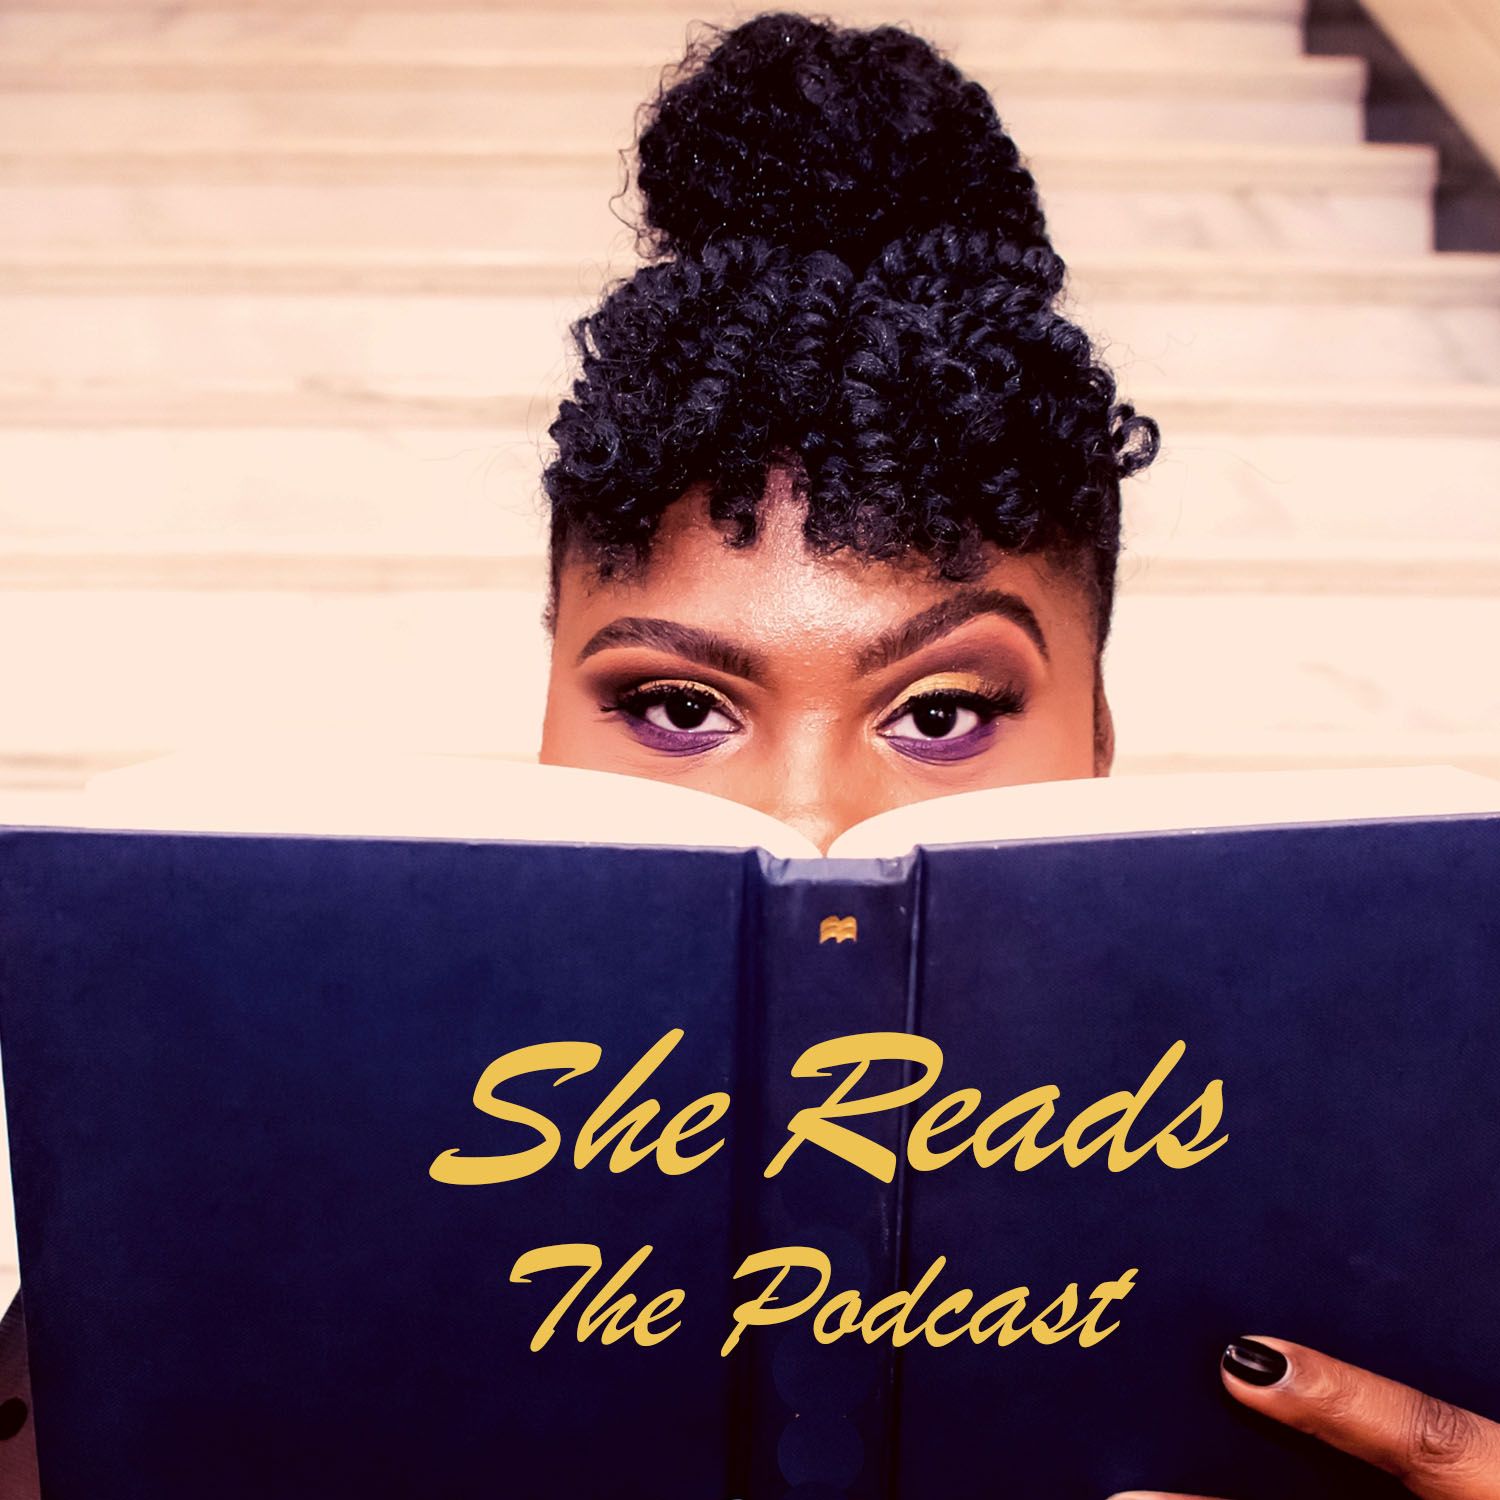 She Reads The Podcast